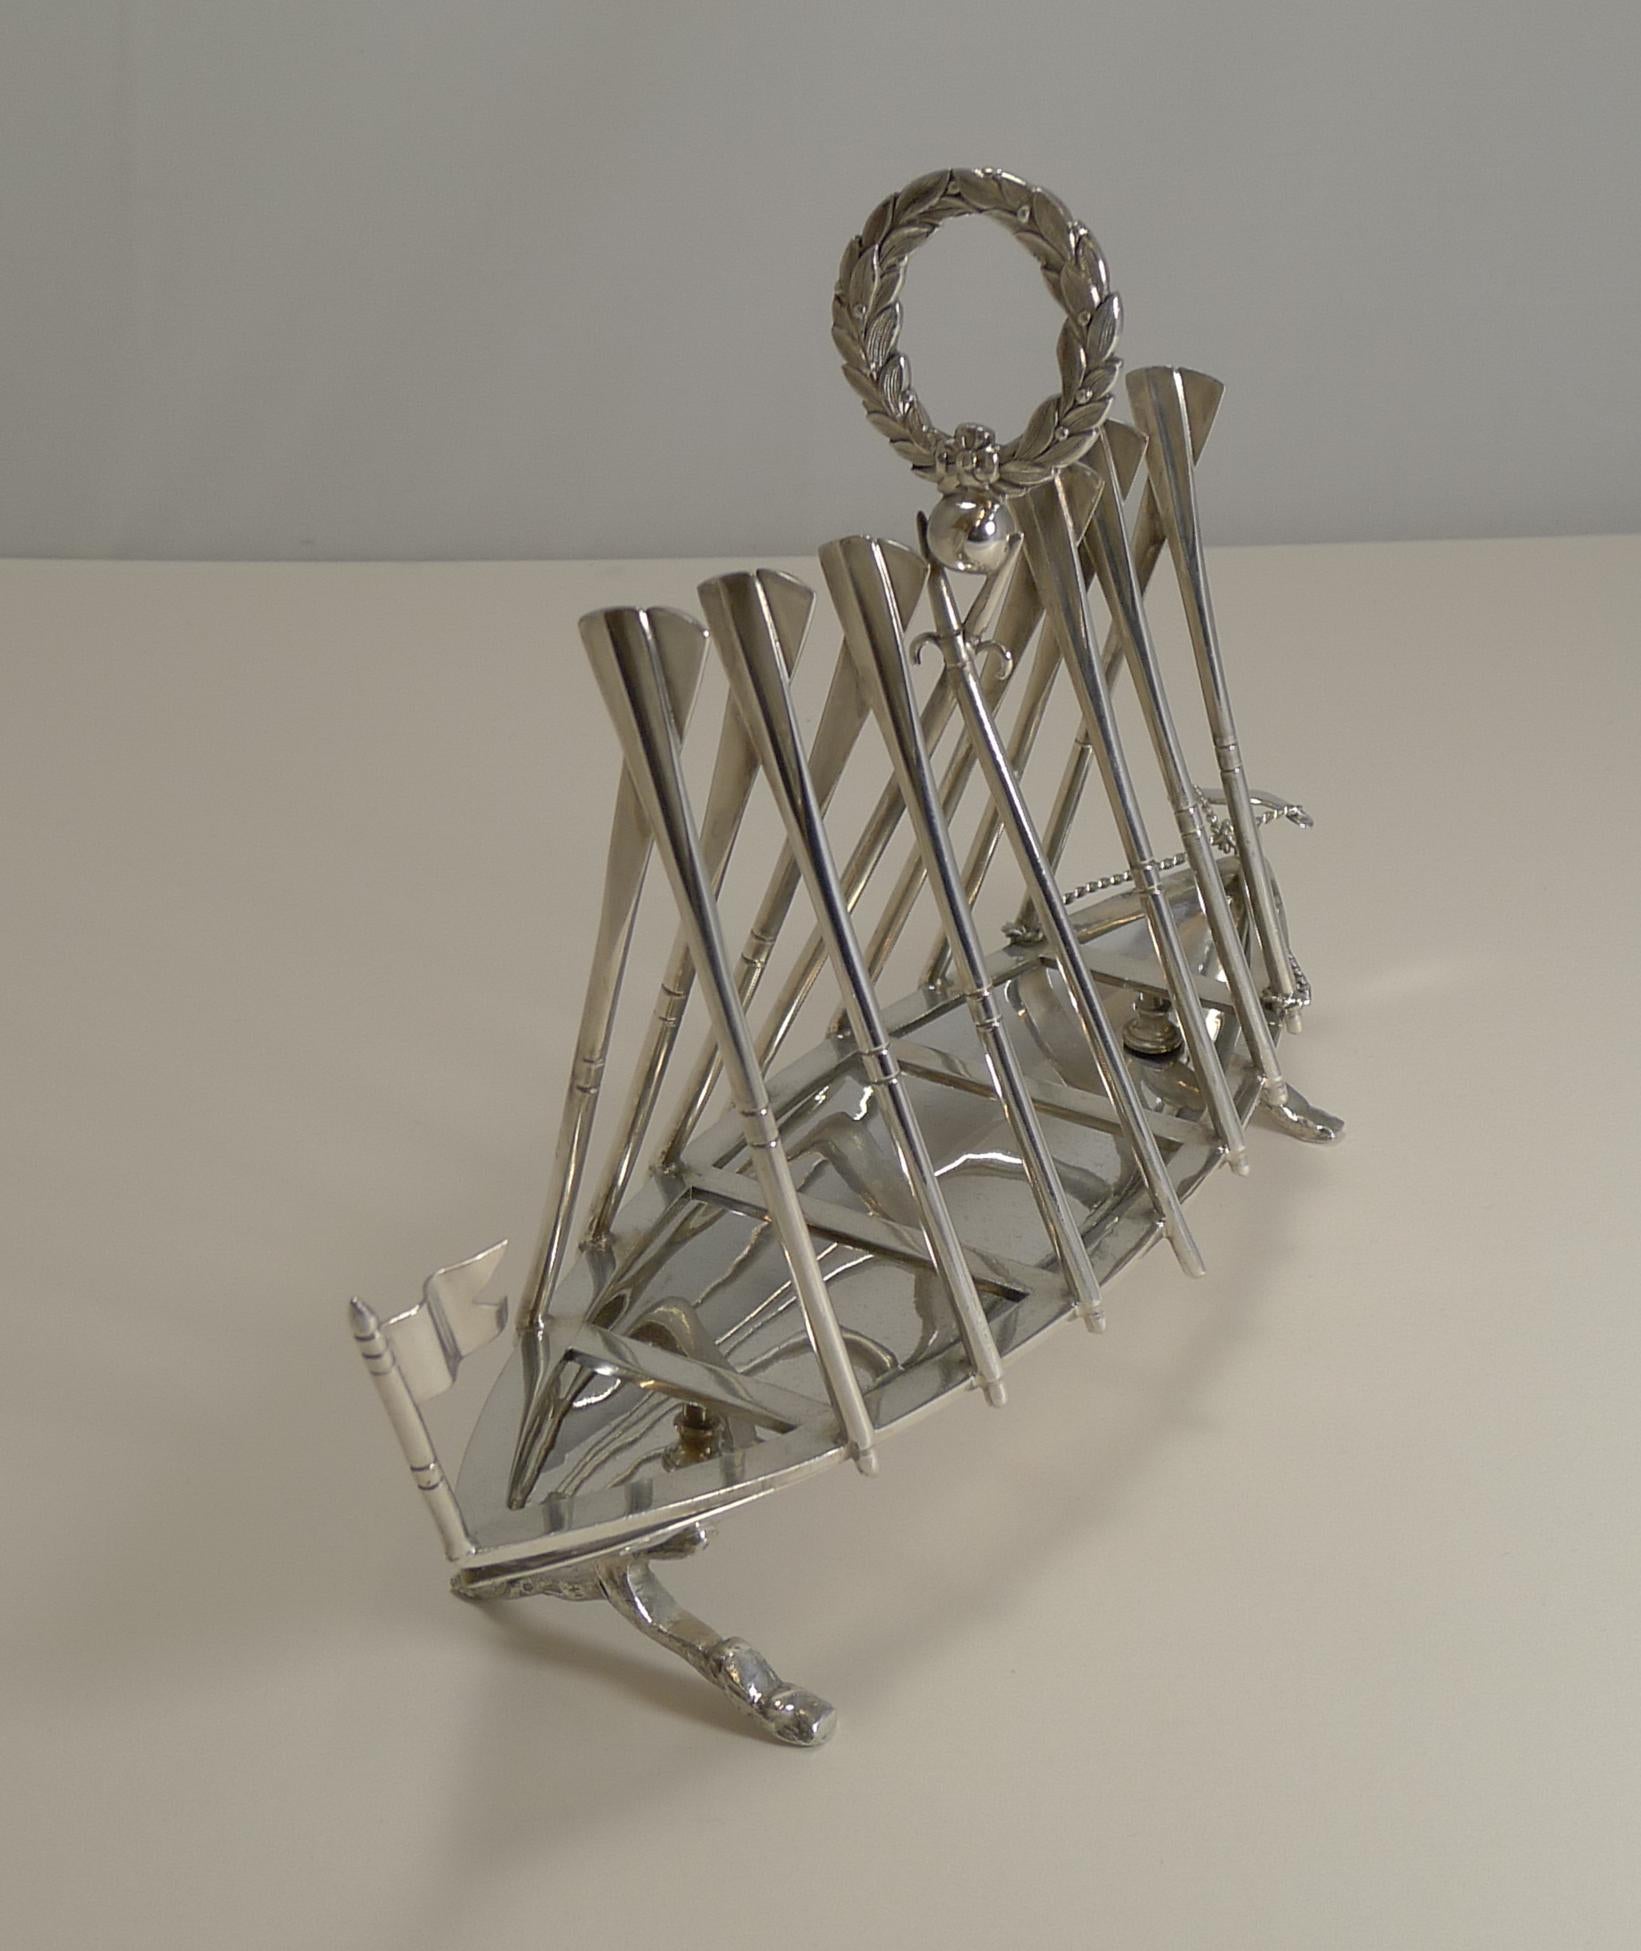 Silver Plate Rare Antique Novelty Toast Rack, Rowing Gig by Benetfink, London, circa 1880